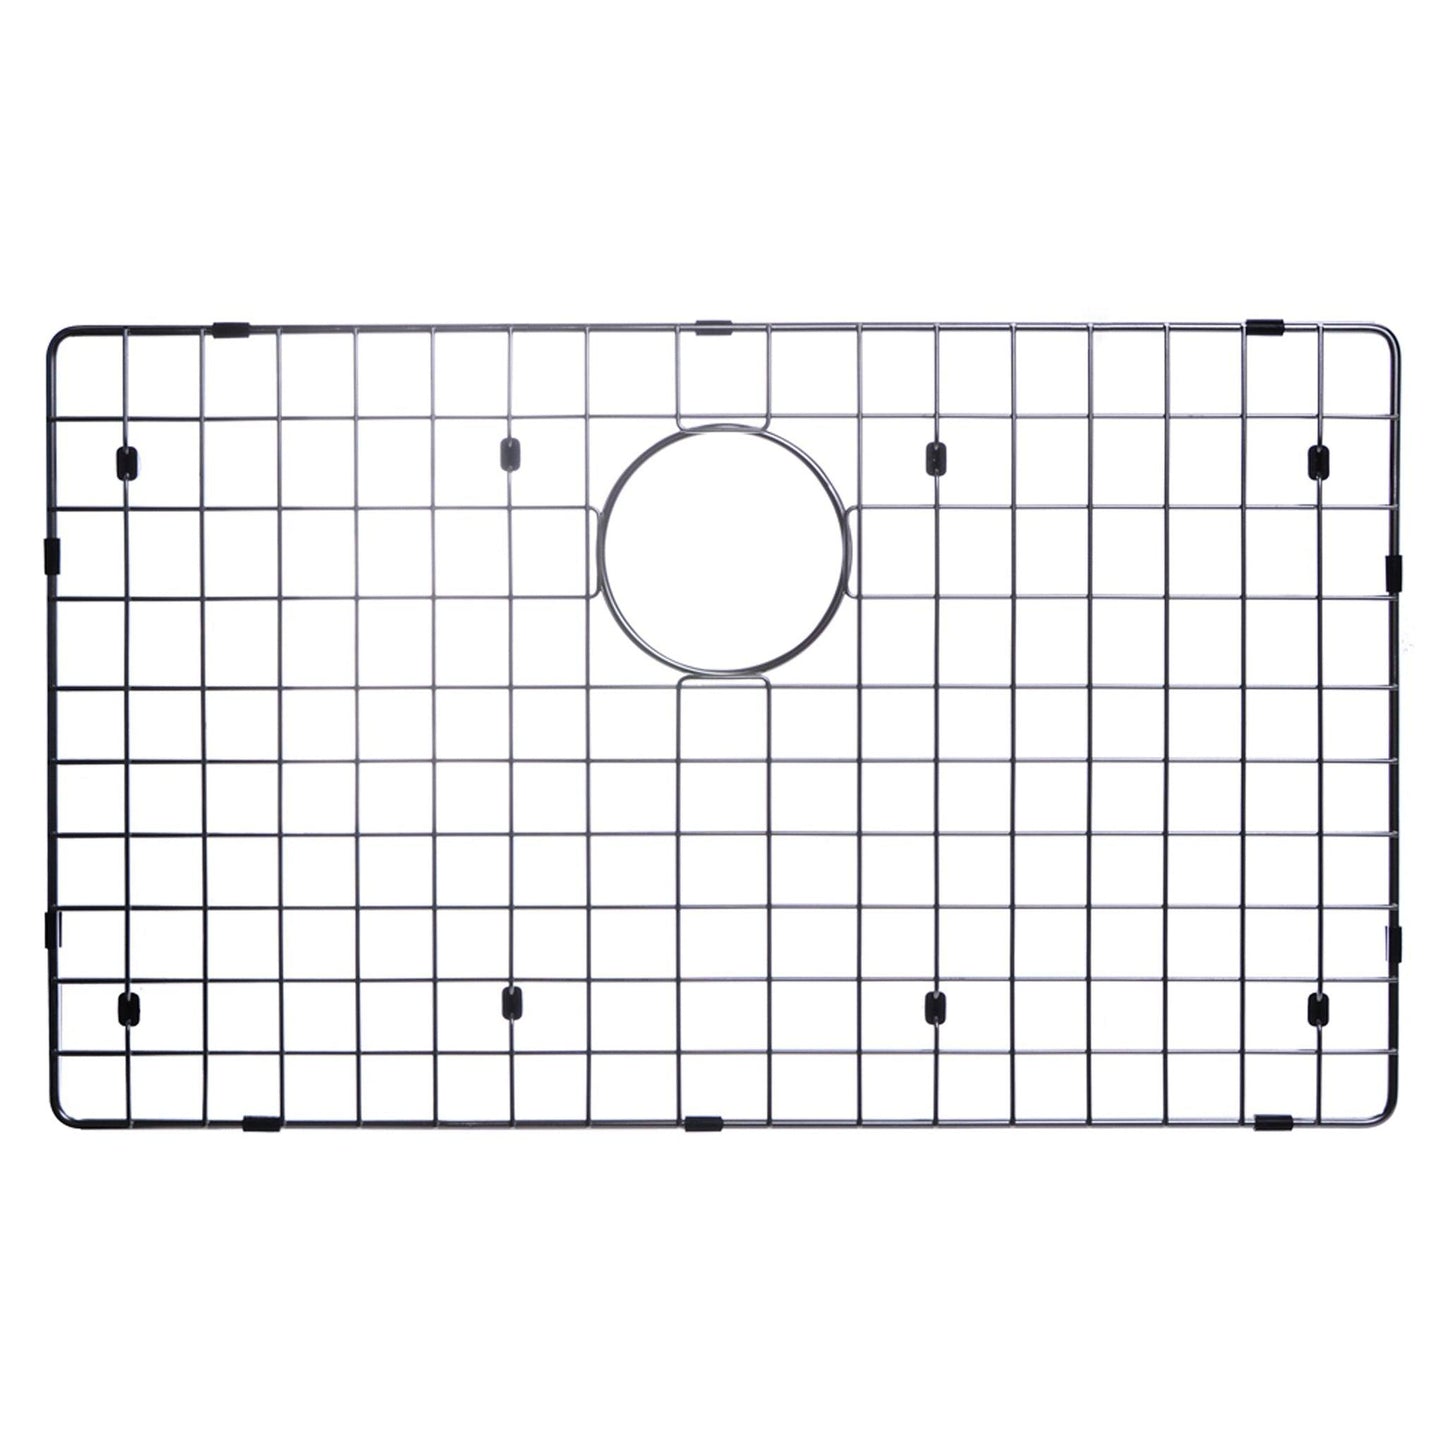 Water Creation Zero Radius Single Bowl Stainless Steel Hand Made Undermount 33 Inch X 19 Inch Sink With Drain, Strainer, And Bottom Grid